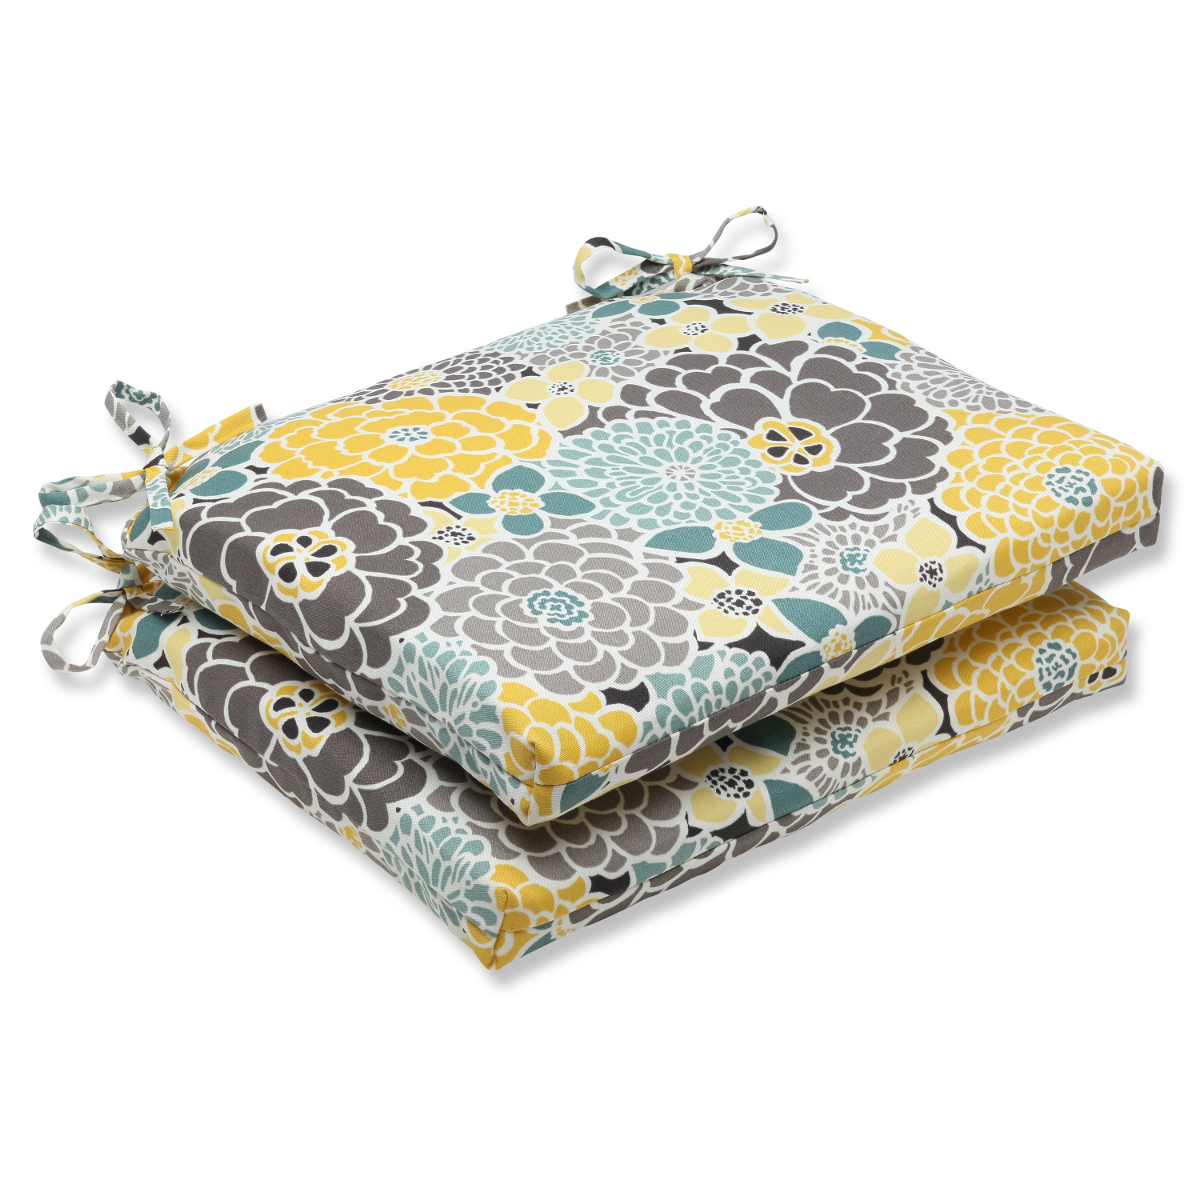 CC Outdoor Living Set of 2 Yellow, Blue and Gray Flor Grande Decorative Outdoor Patio Chair Cushions 18.5"